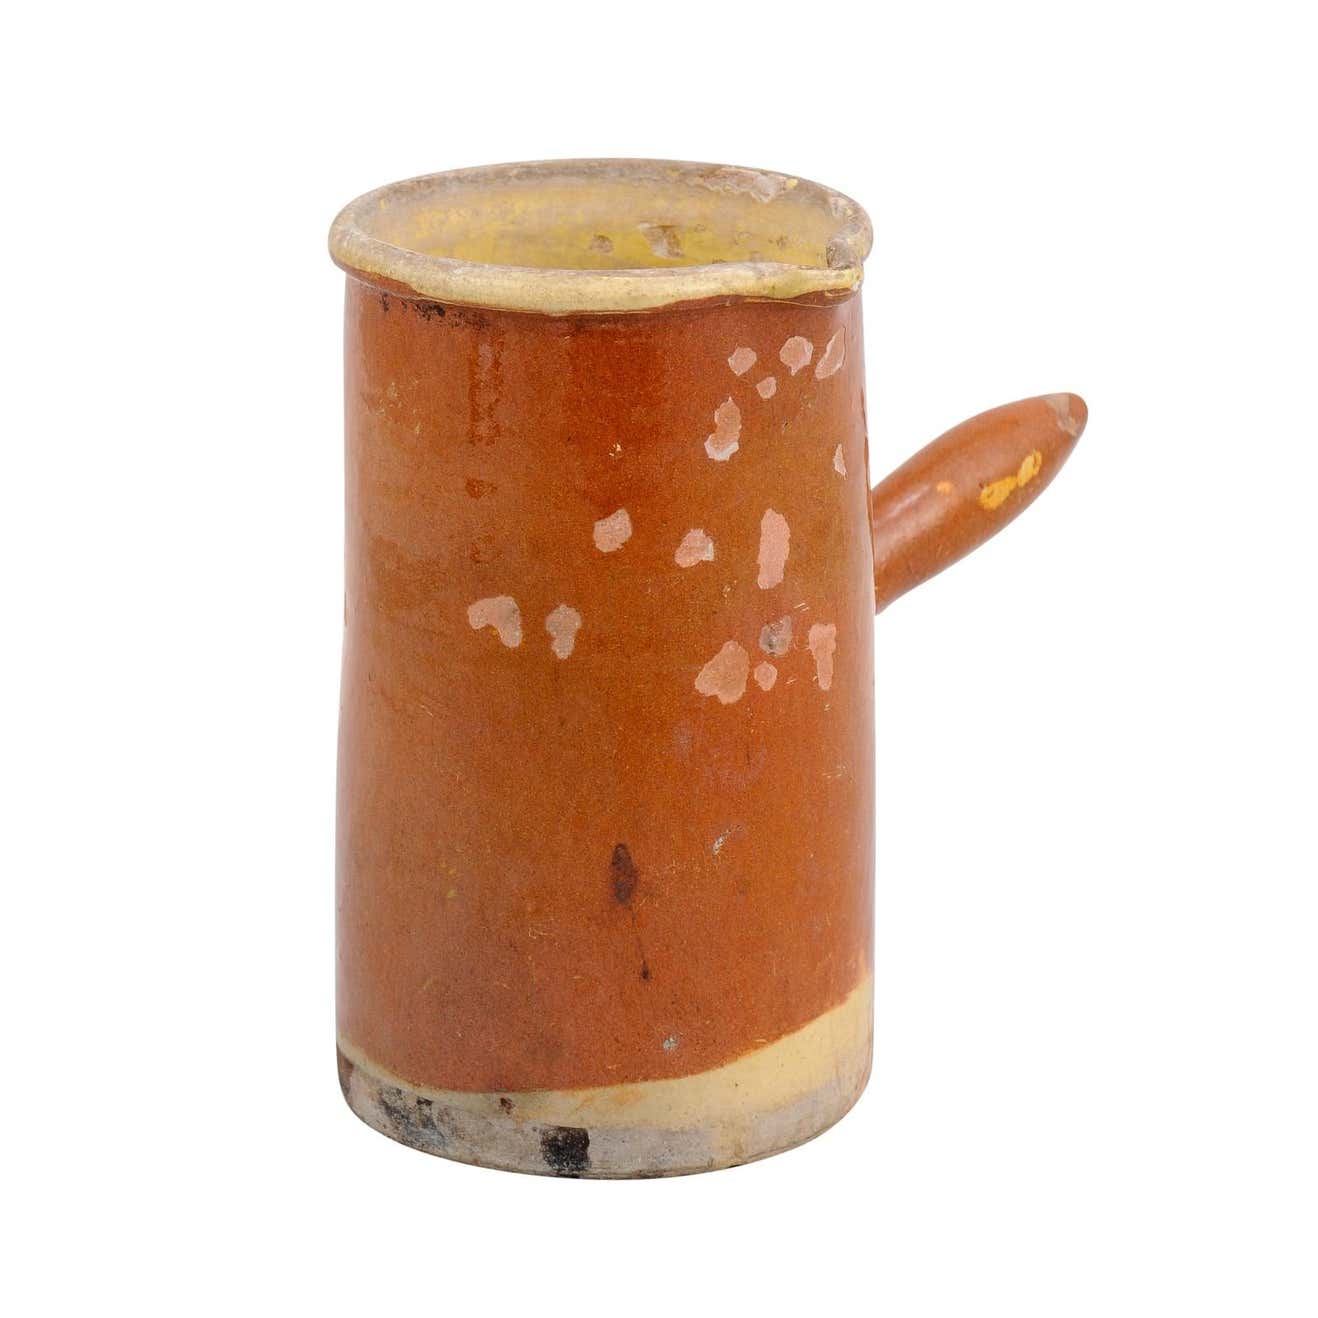 French 19th Century Rustic Pitcher with Rust Colored Glaze and Straight Handle